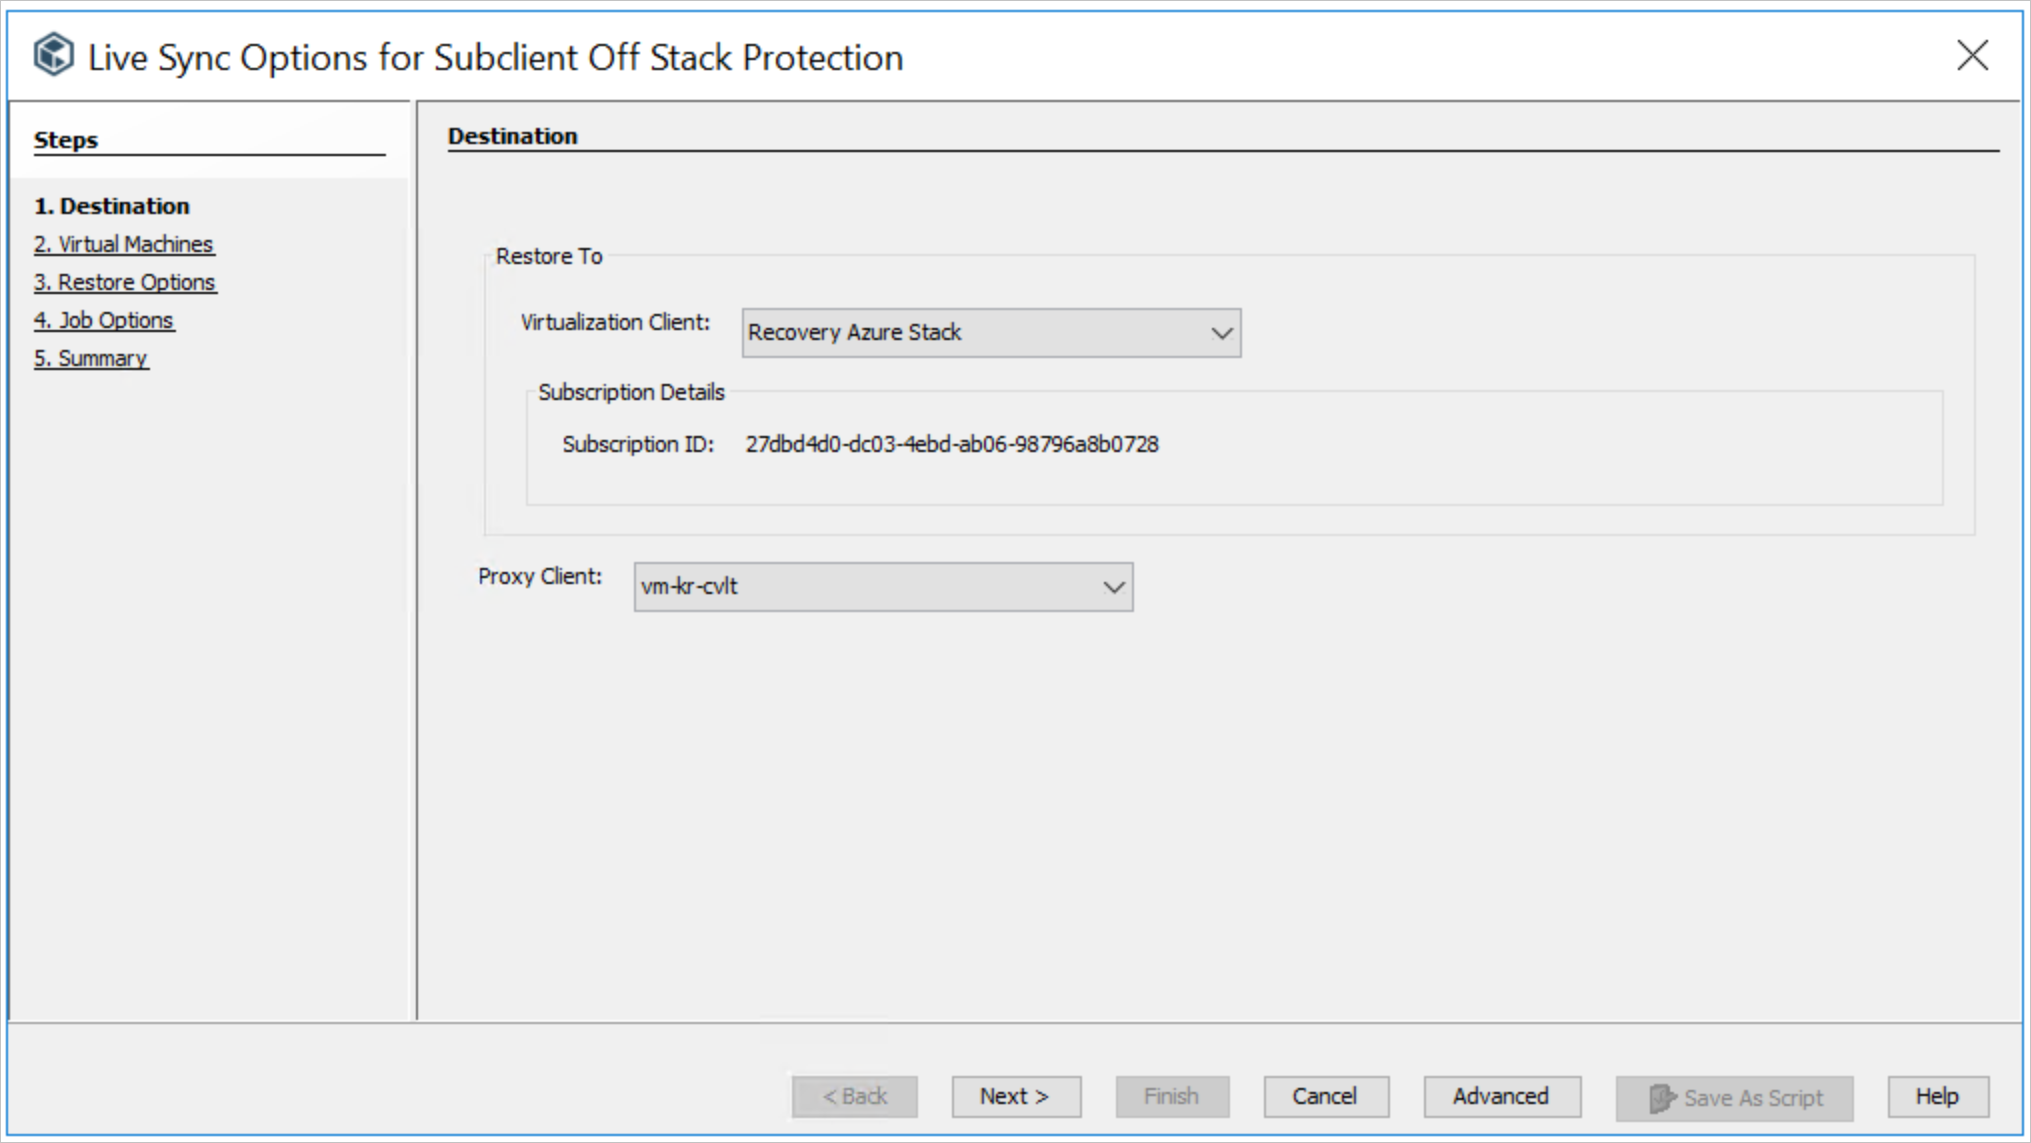 The Destination step of the Live Sync Options for Subclient Off Stack Protection wizard has list boxes for specifying the Virtualization Client and the Proxy Client.